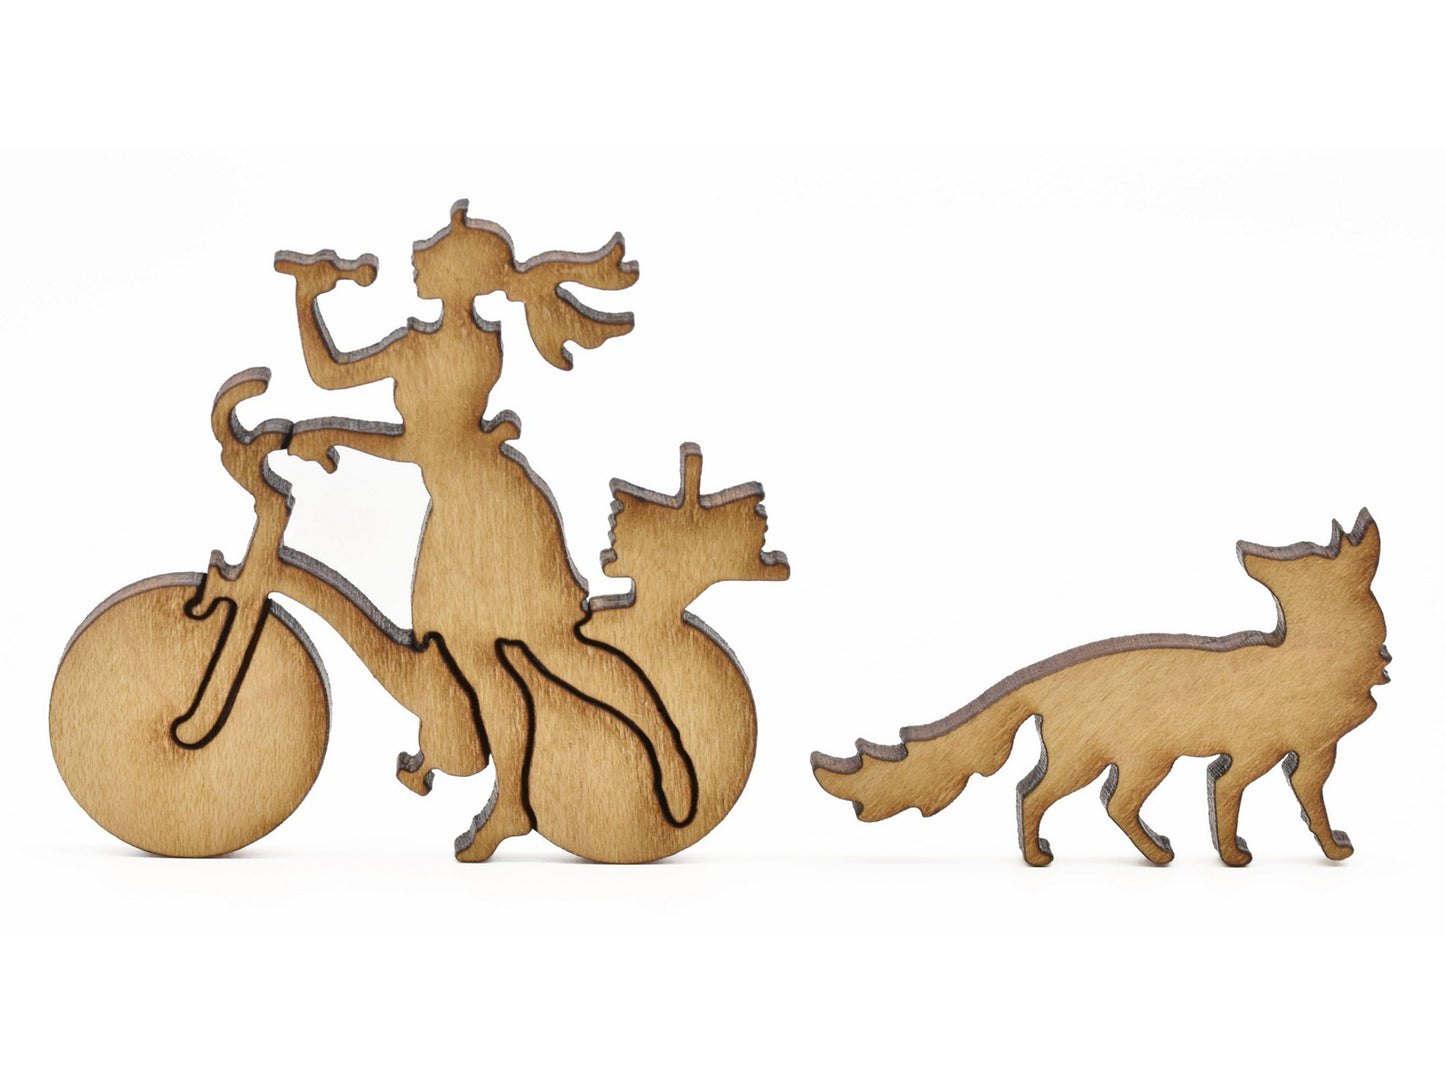 A closeup of pieces in the shape of a person with a bike and a fox.